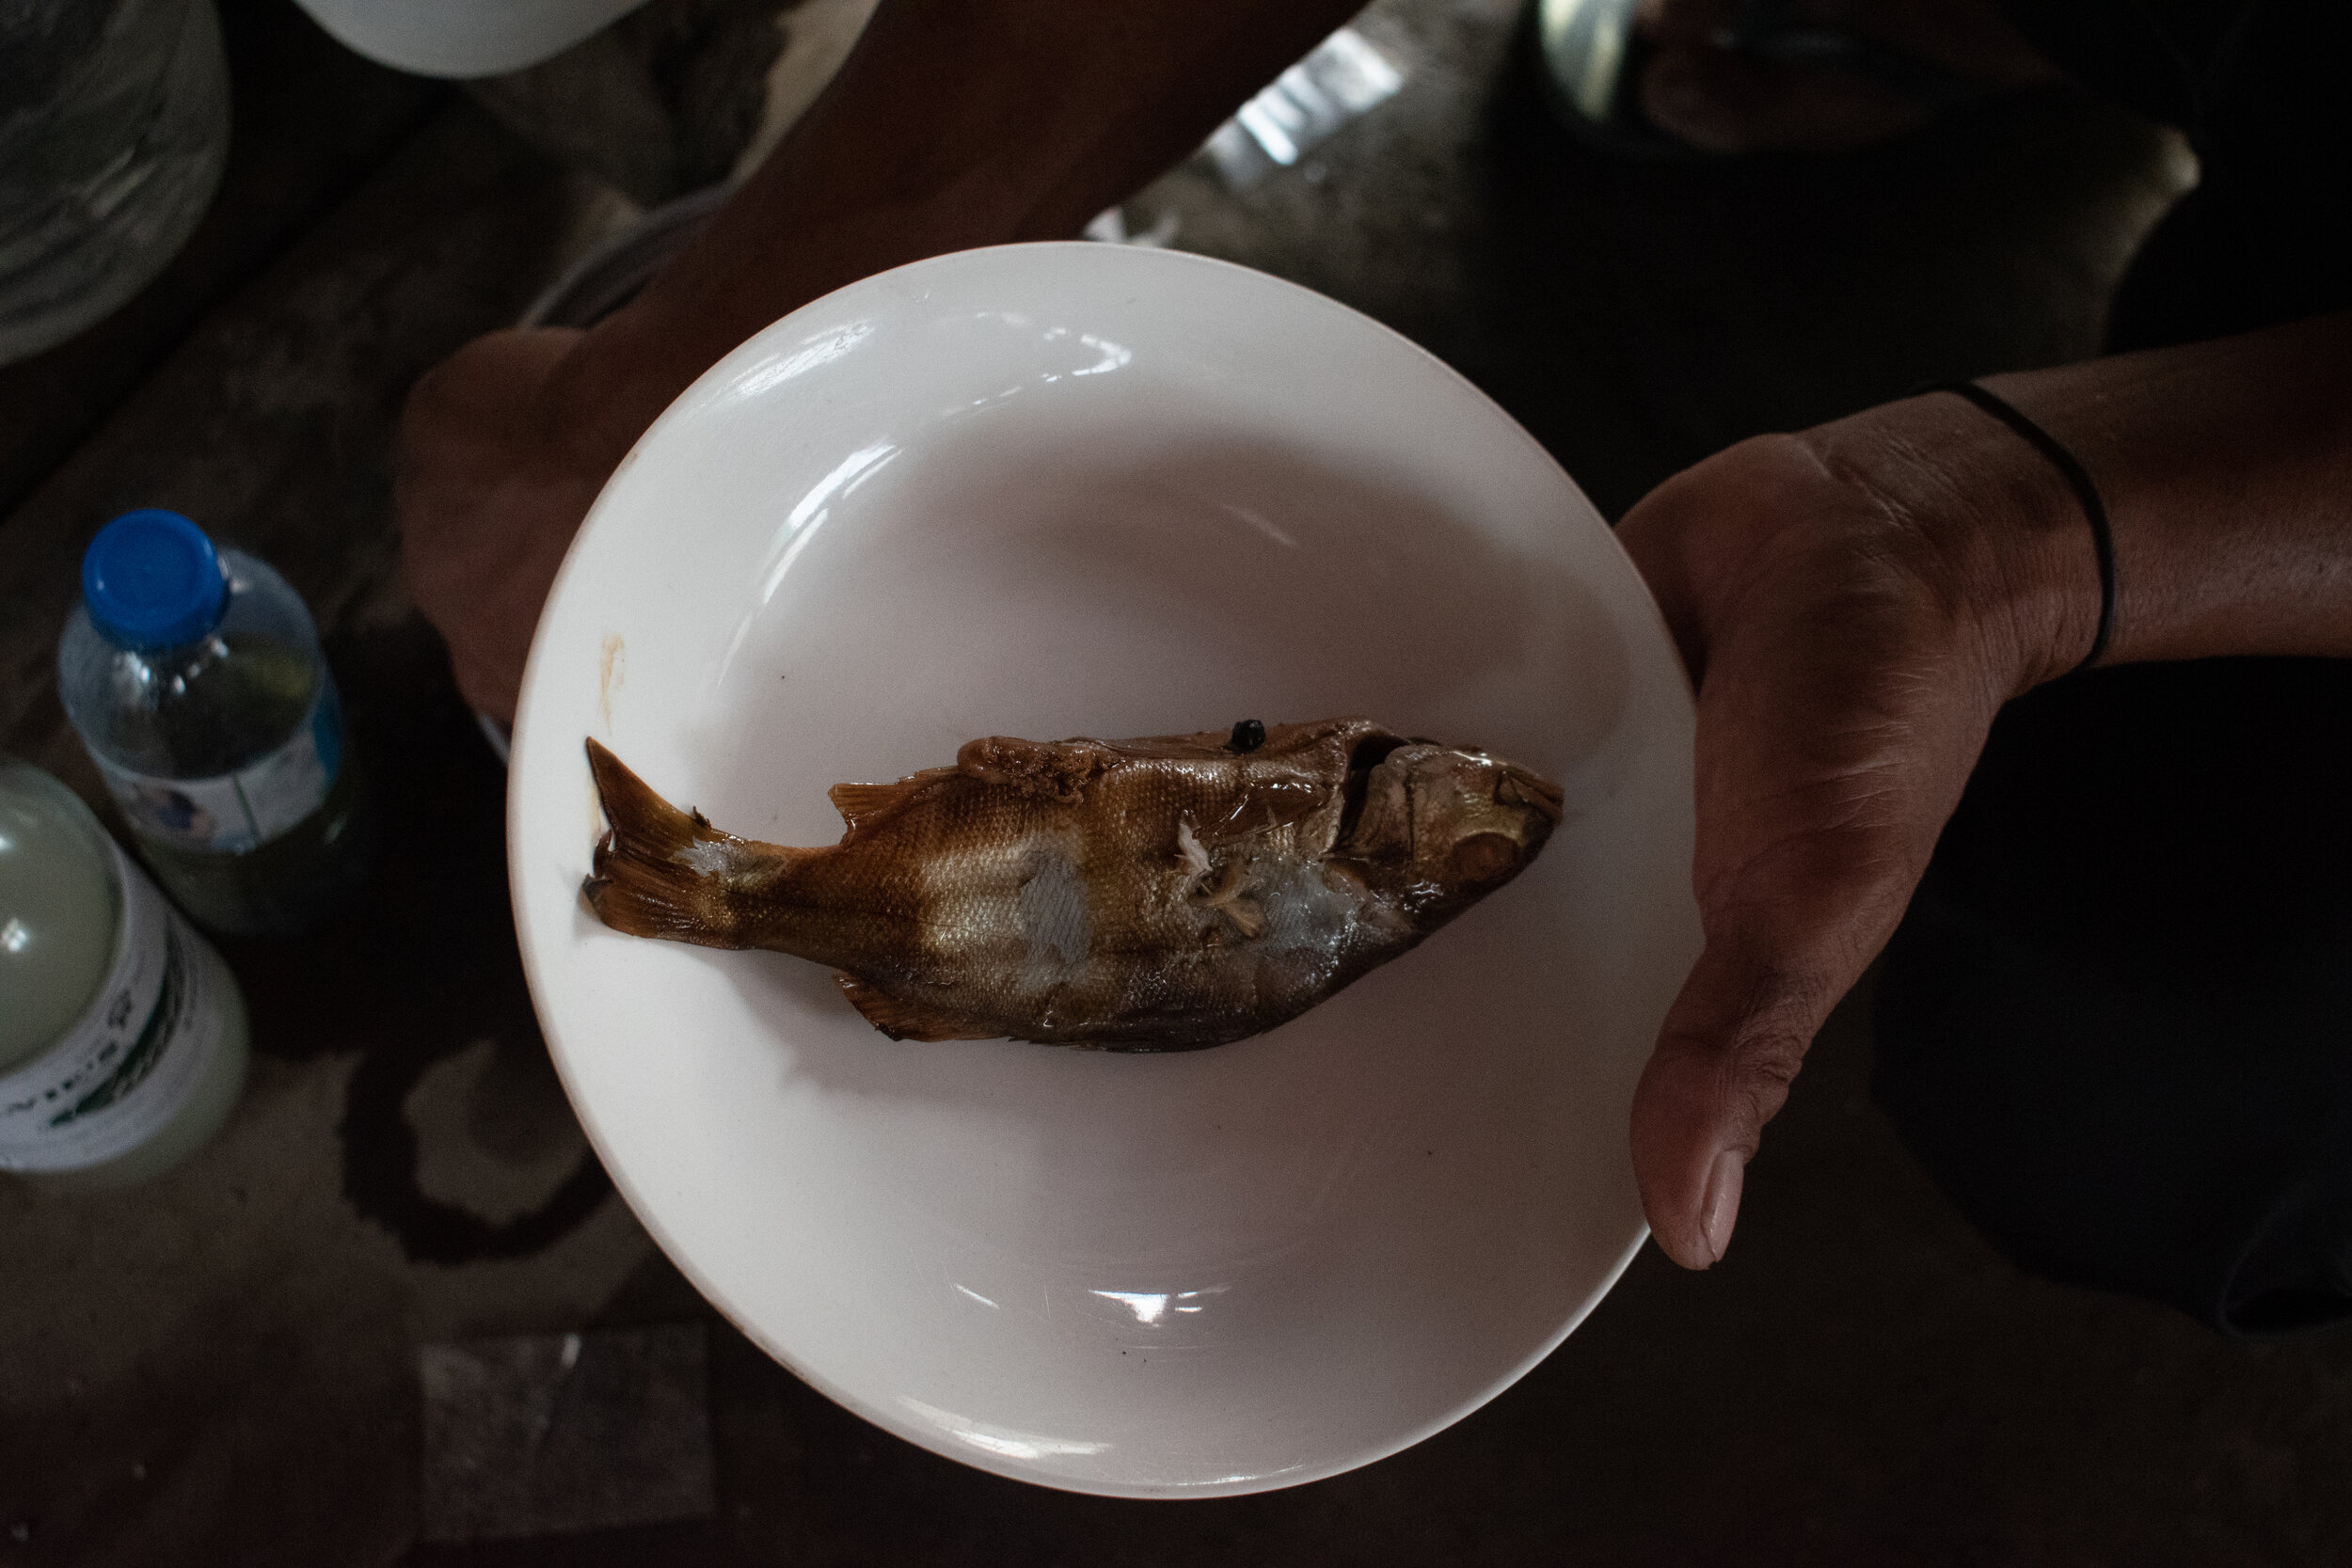  Eduardo earns between P300 to P500 daily from his catch, but on a bad day, this could go down to zero. His wife Maricris Dela Cruz makes sure there’s enough money to buy food, while saving whatever they can to send to their children in Bulacan. If a